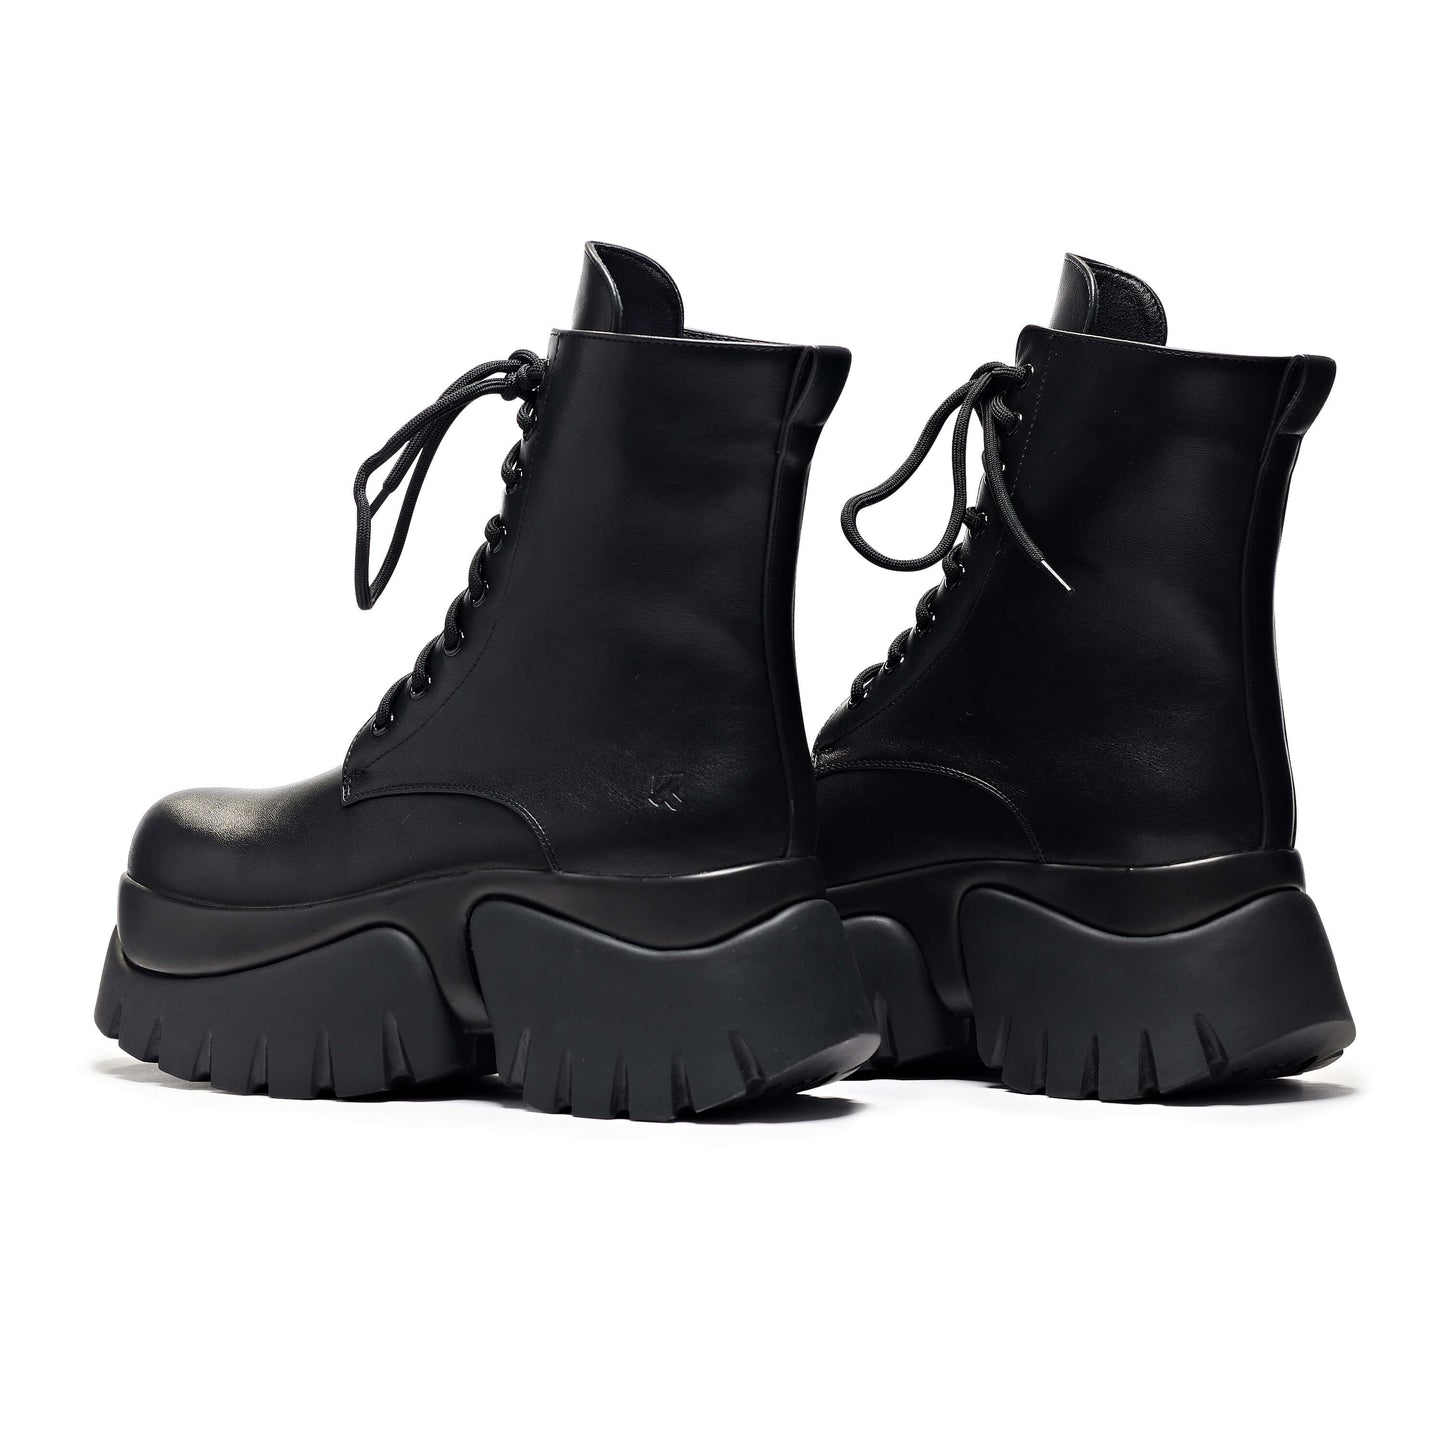 Rancor Vilun Black Lace up Boots - Ankle Boots - KOI Footwear - Black - Back View